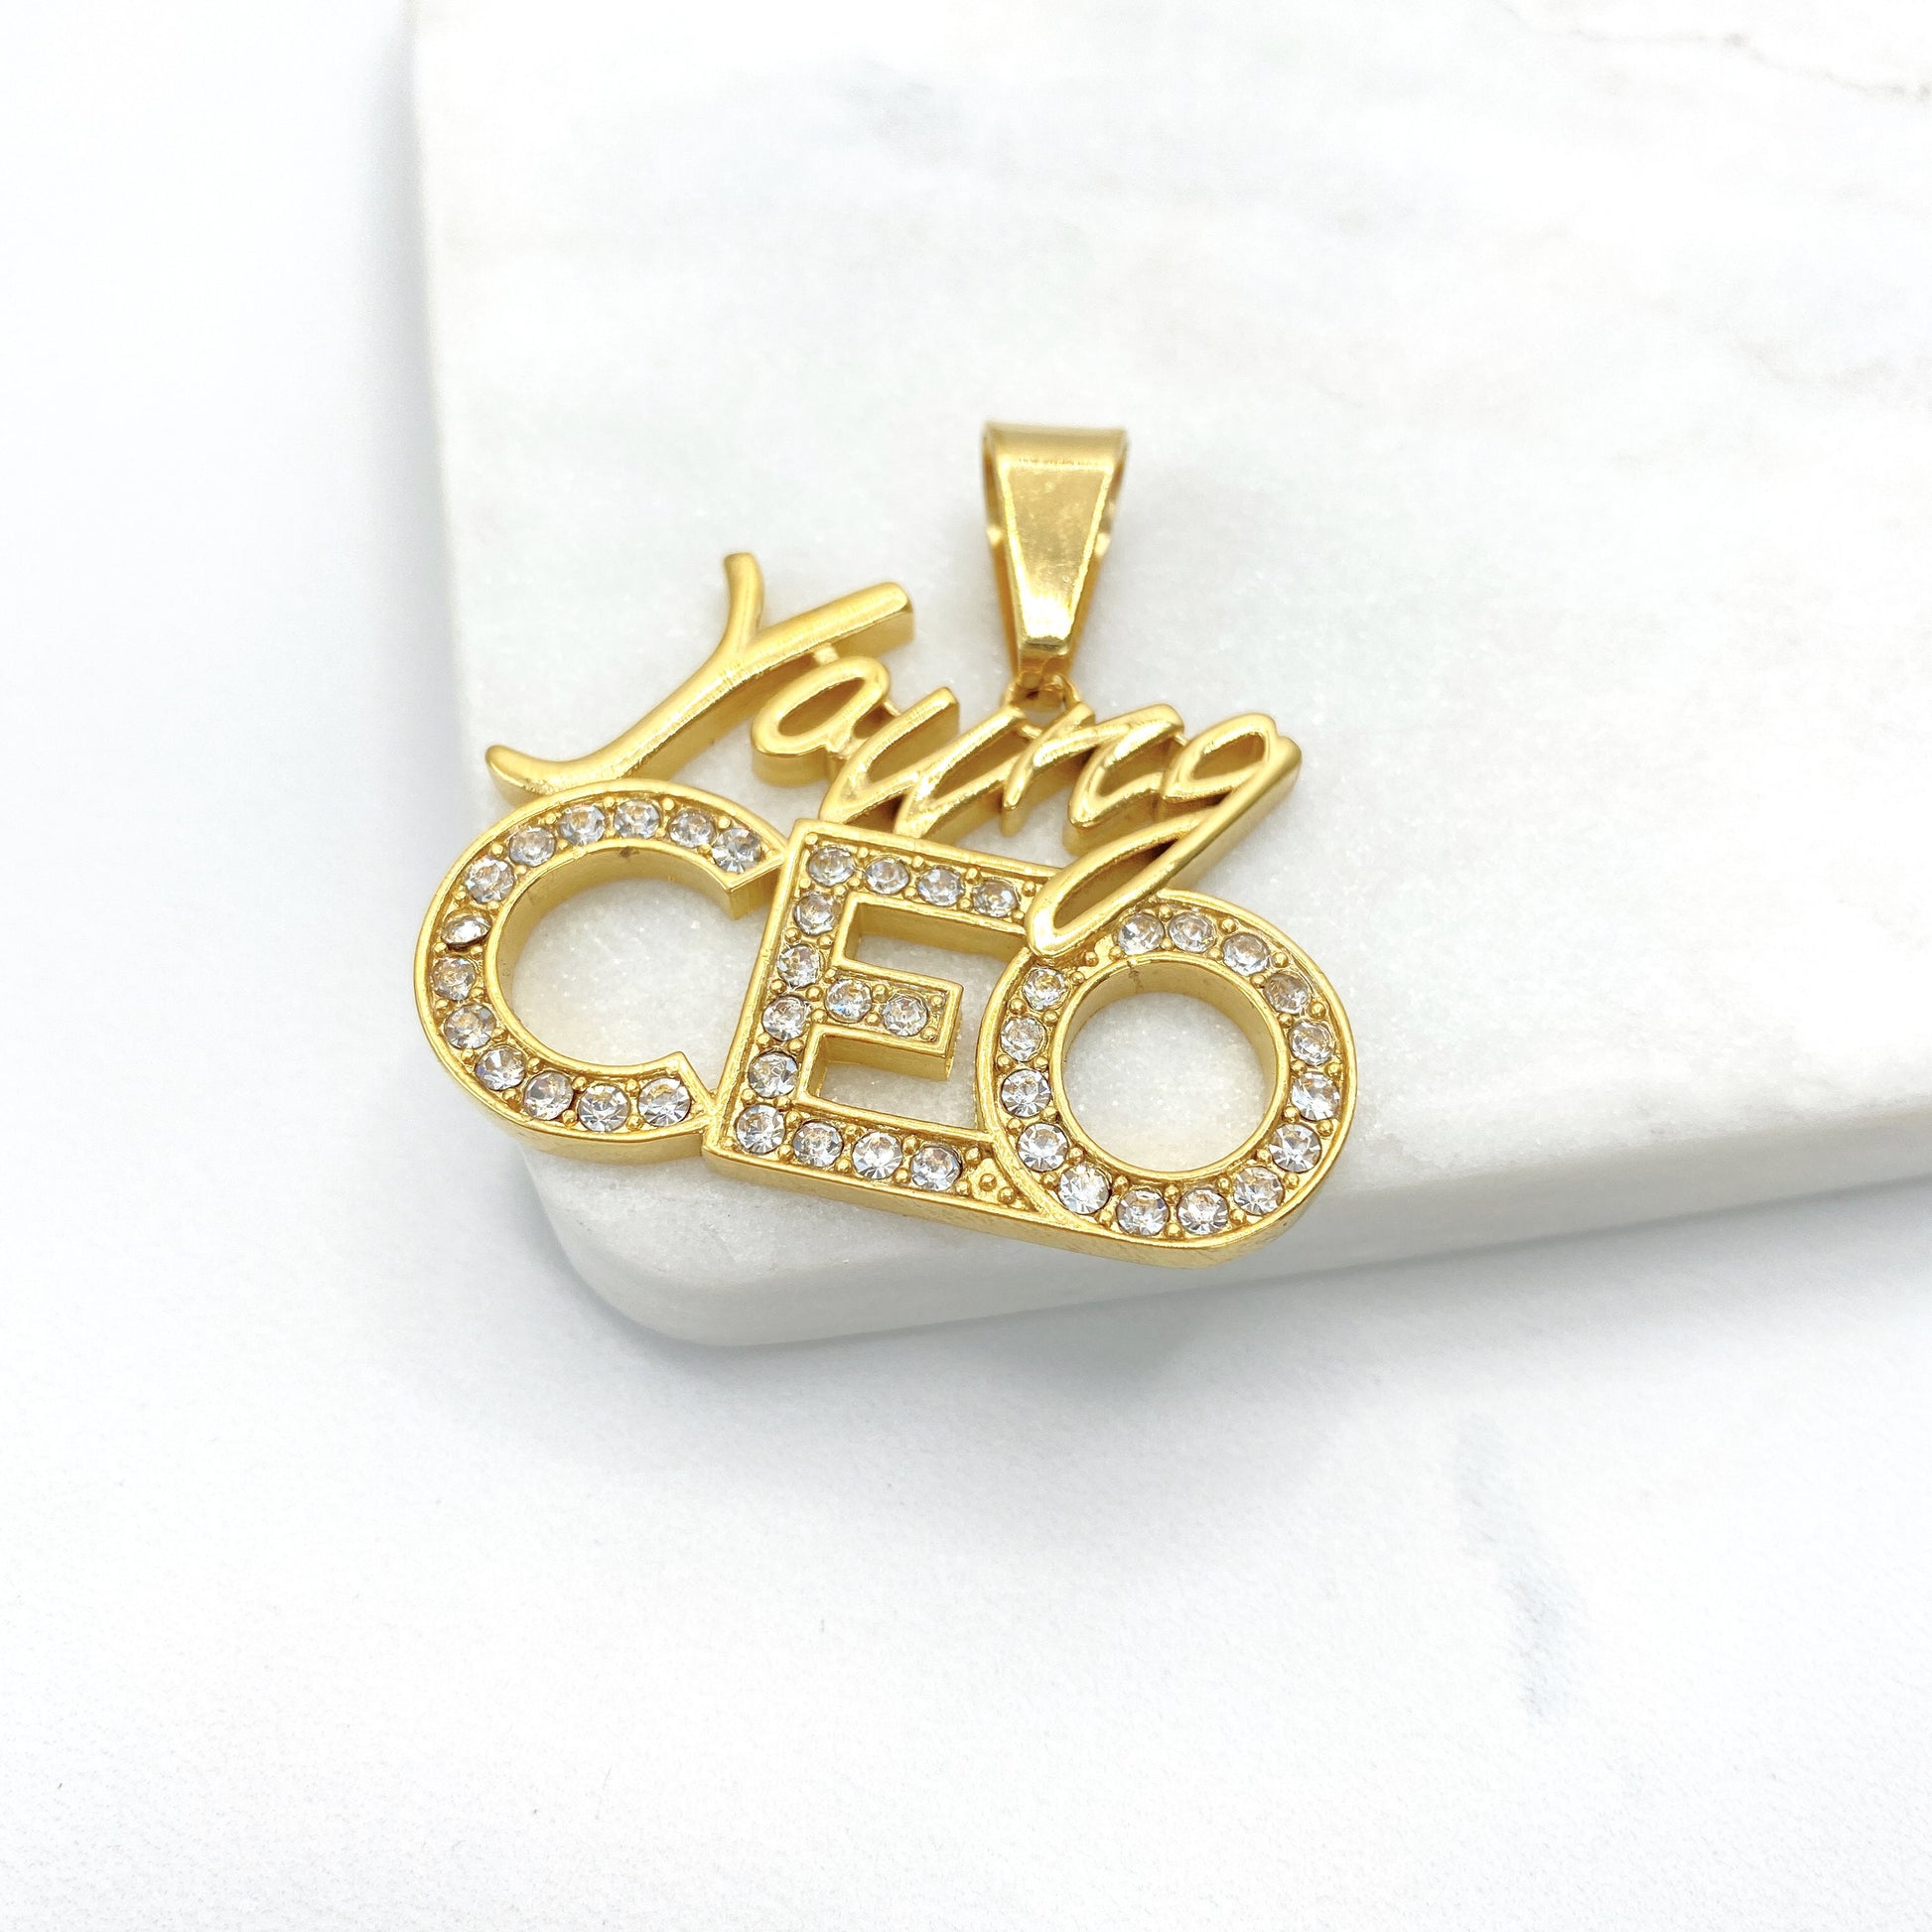 Stainless Steal, Cubic Zirconia ''Young CEO'' Charms Pendant, Gold or Silver, Wholesale Jewelry Making Supplies